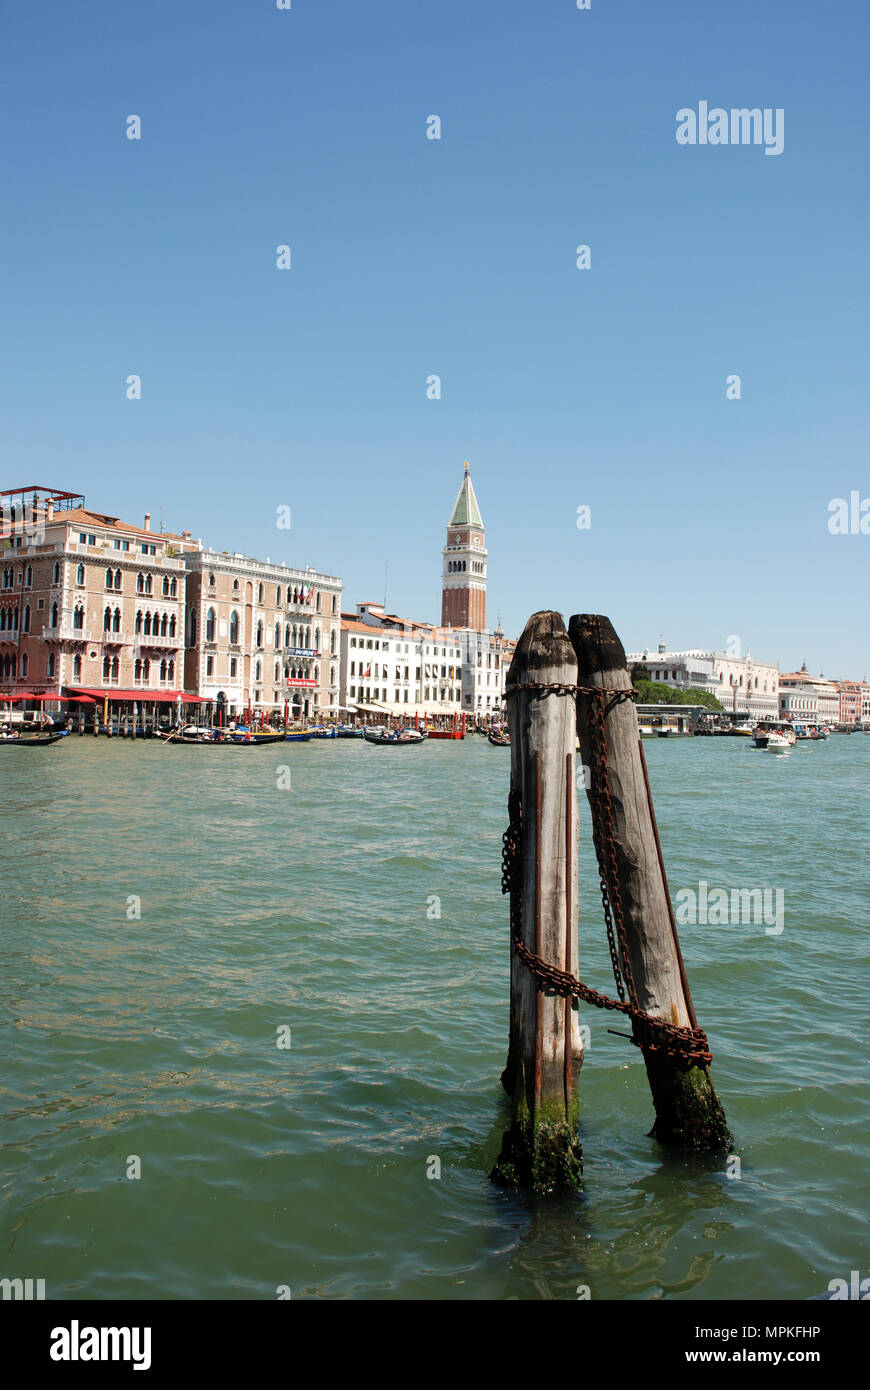 View of Venice from a distance Stock Photo